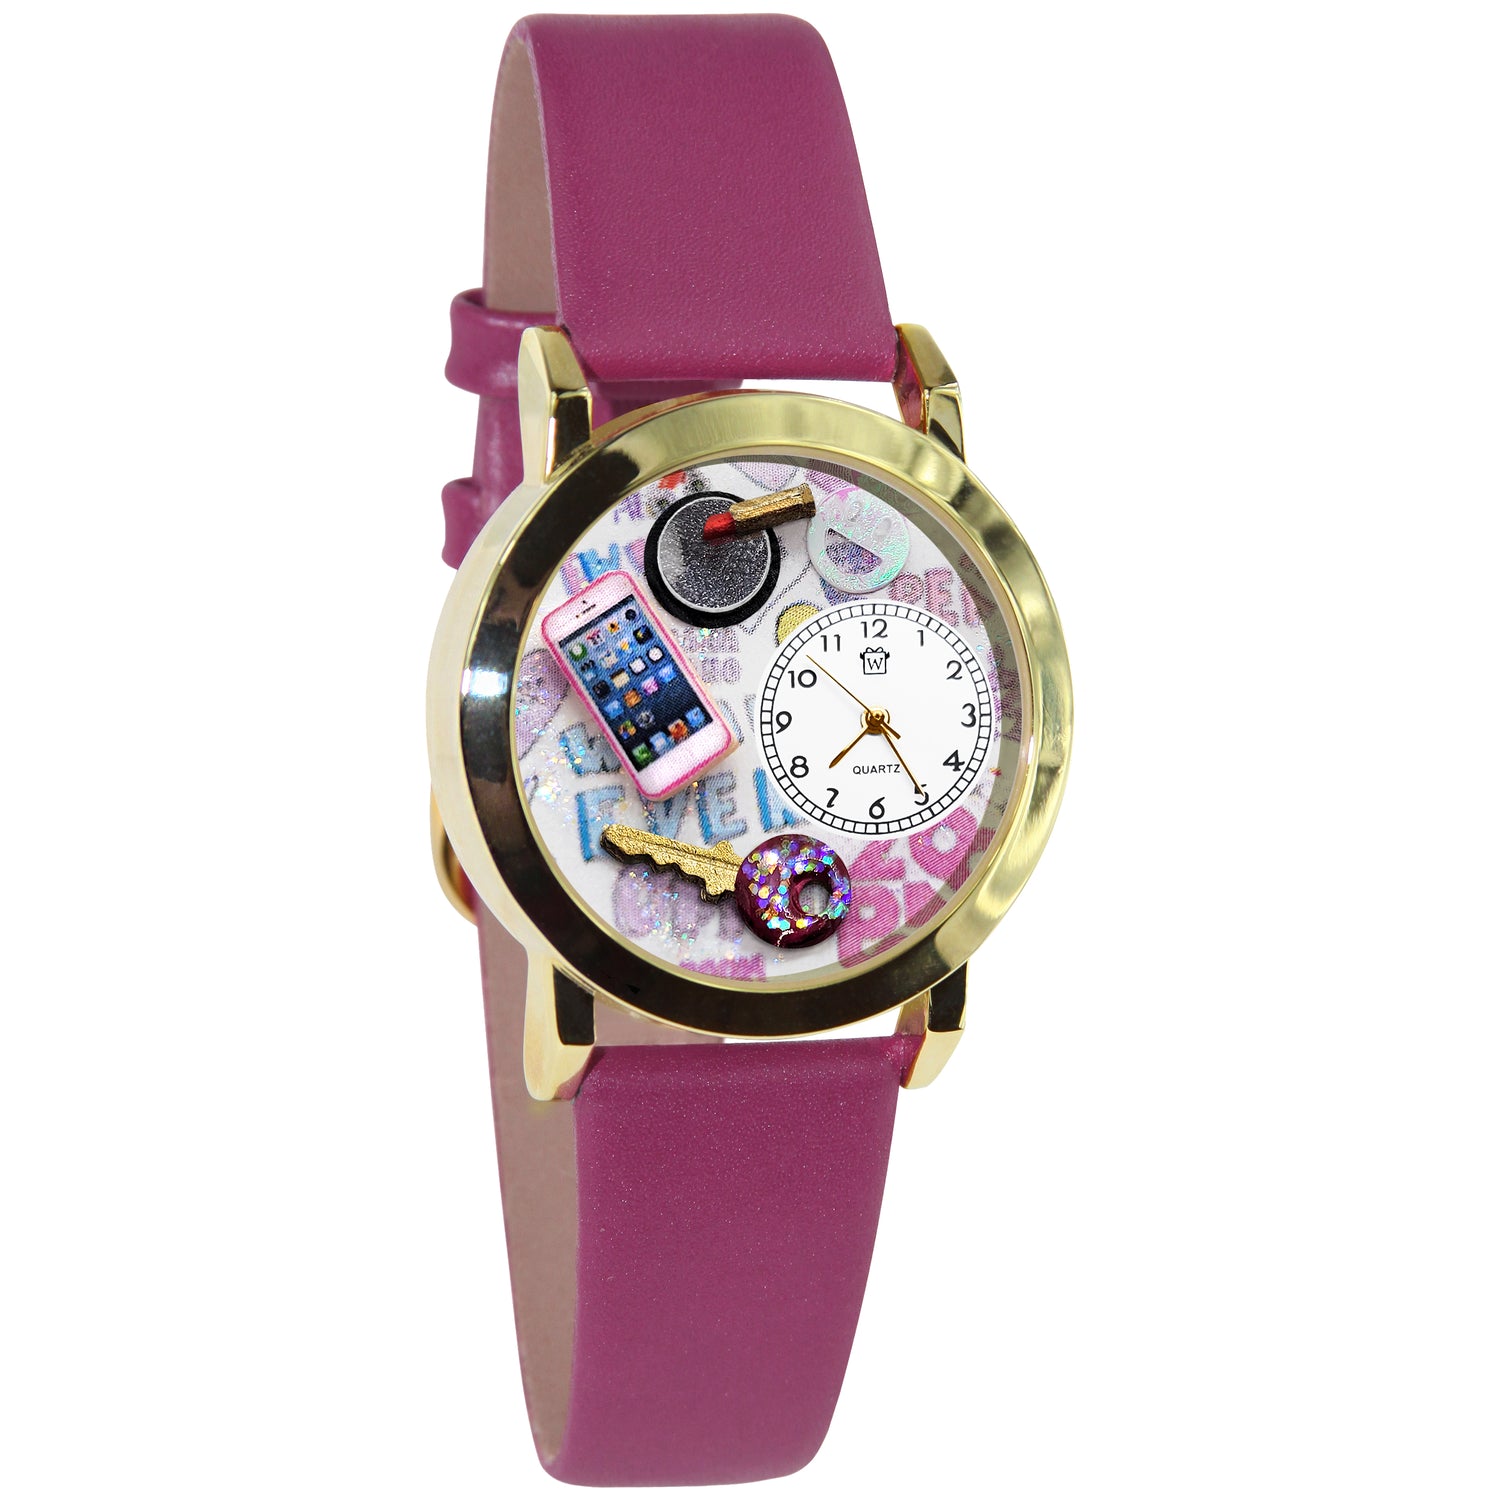 Whimsical Gifts | Teen Girl 3D Watch Small Style | Handmade in USA | Youth Themed | | Novelty Unique Fun Miniatures Gift | Gold Finish Fuchsia Leather Watch Band